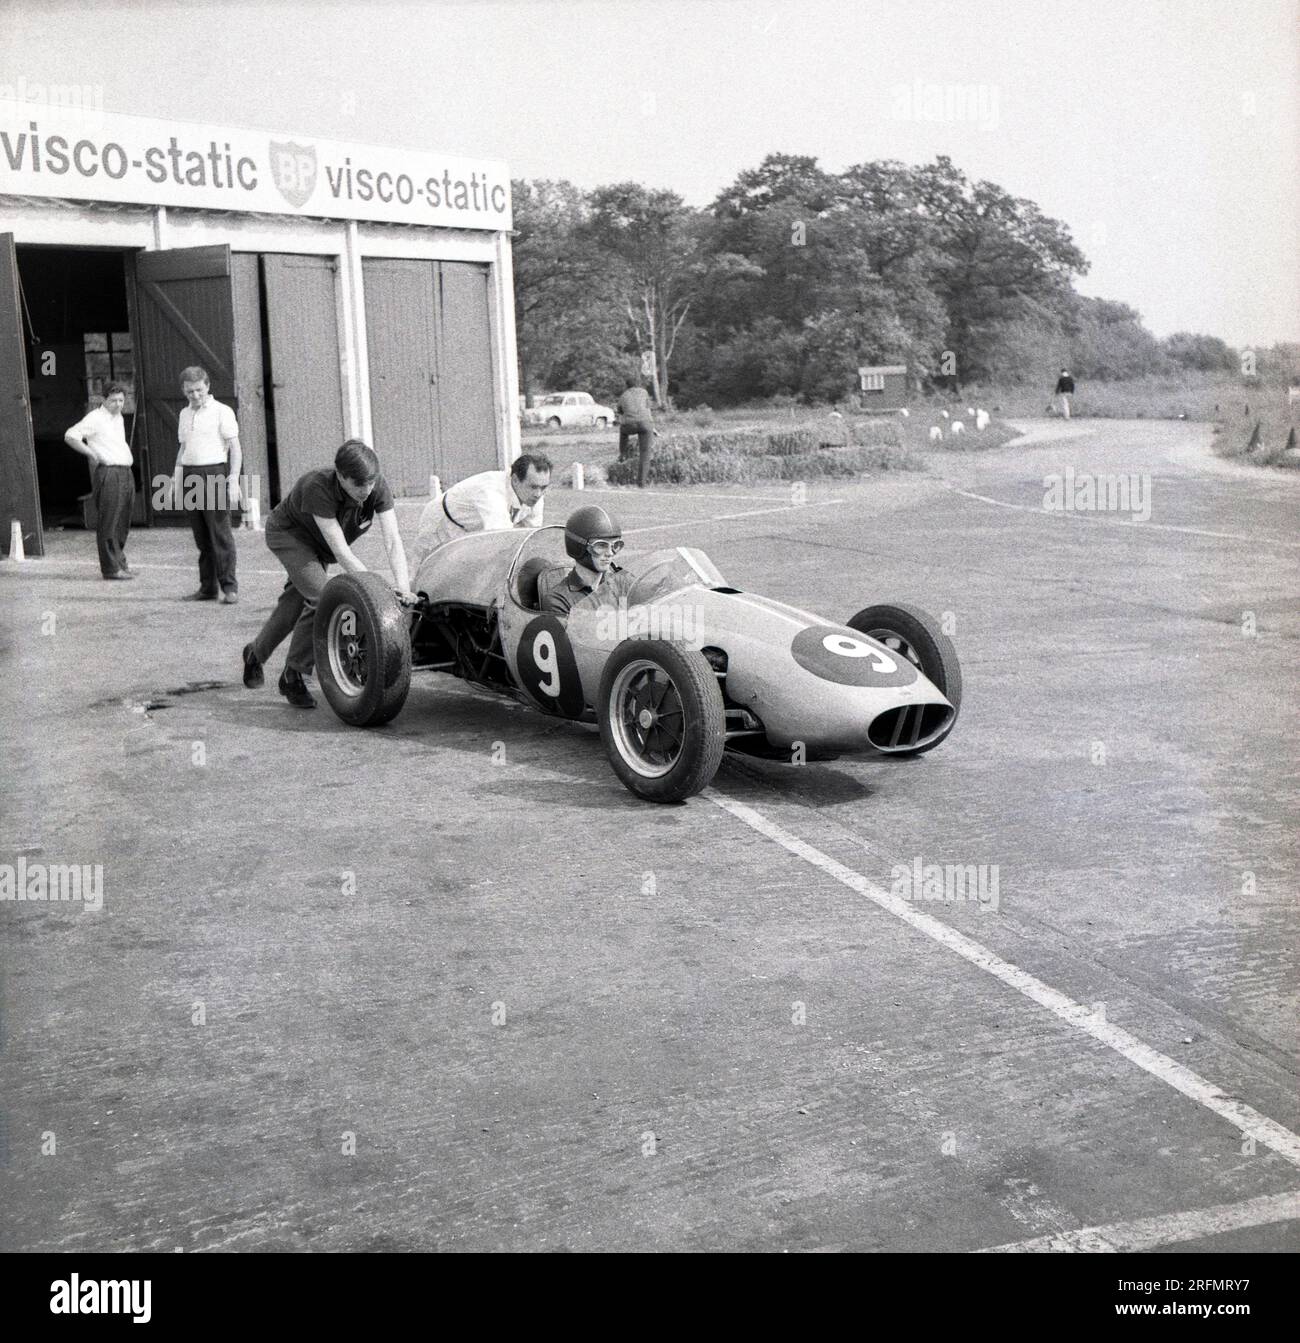 1962, historical, a young male driver sitting in a single-seater Cooper motor racing car being pushed onto the circuit at the motor racing drivers school at the Finmere Aerodrome, Bucks, England, UK, Stock Photo